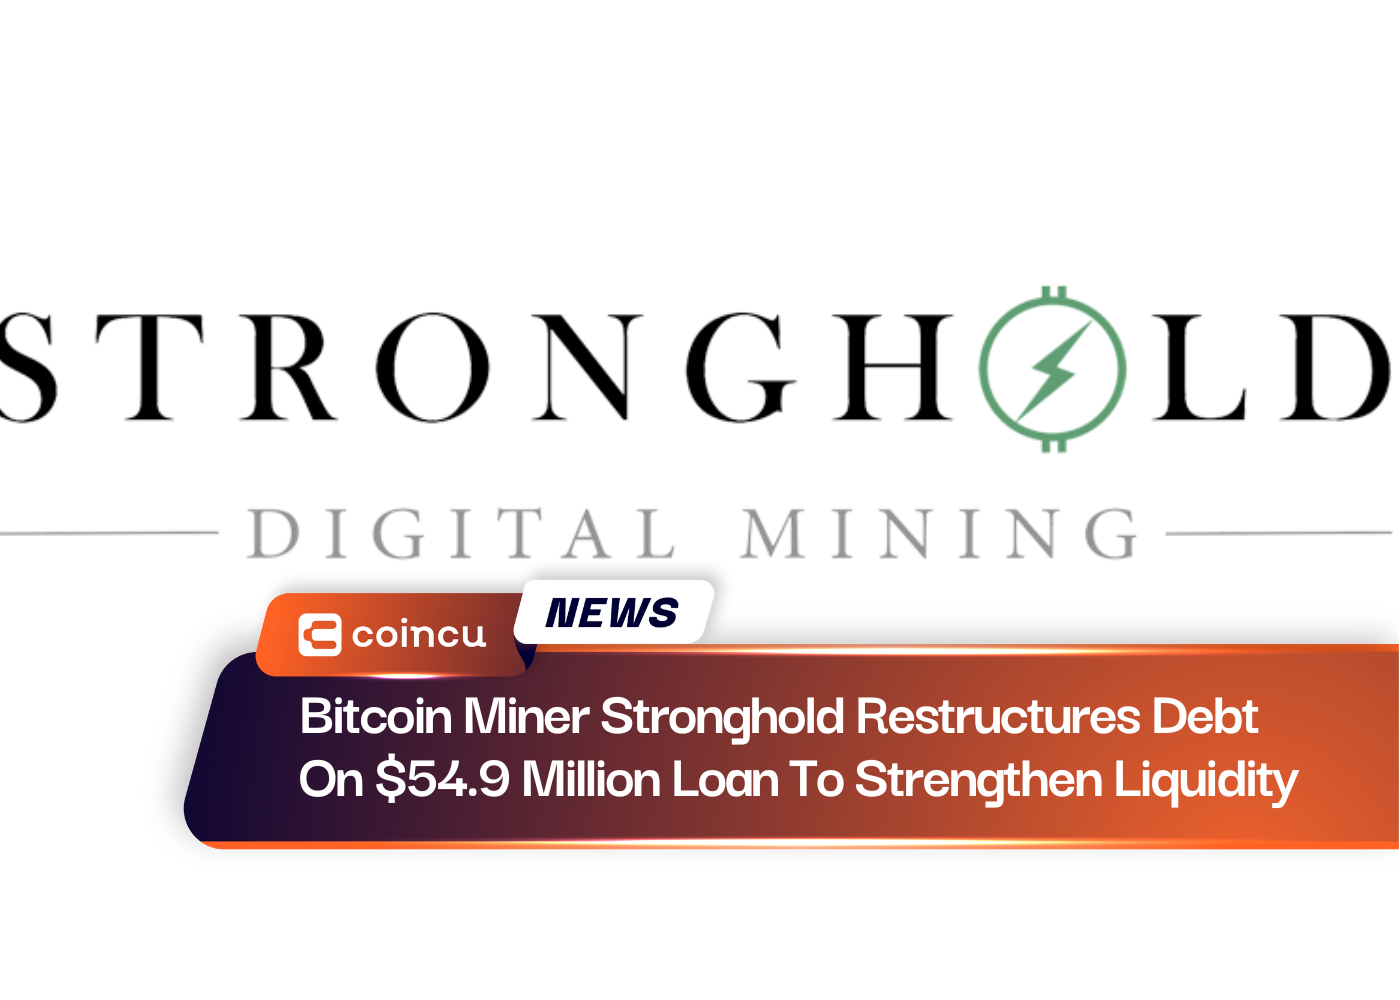 Bitcoin Miner Stronghold Restructures Debt On $54.9 Million Loan To Strengthen Liquidity